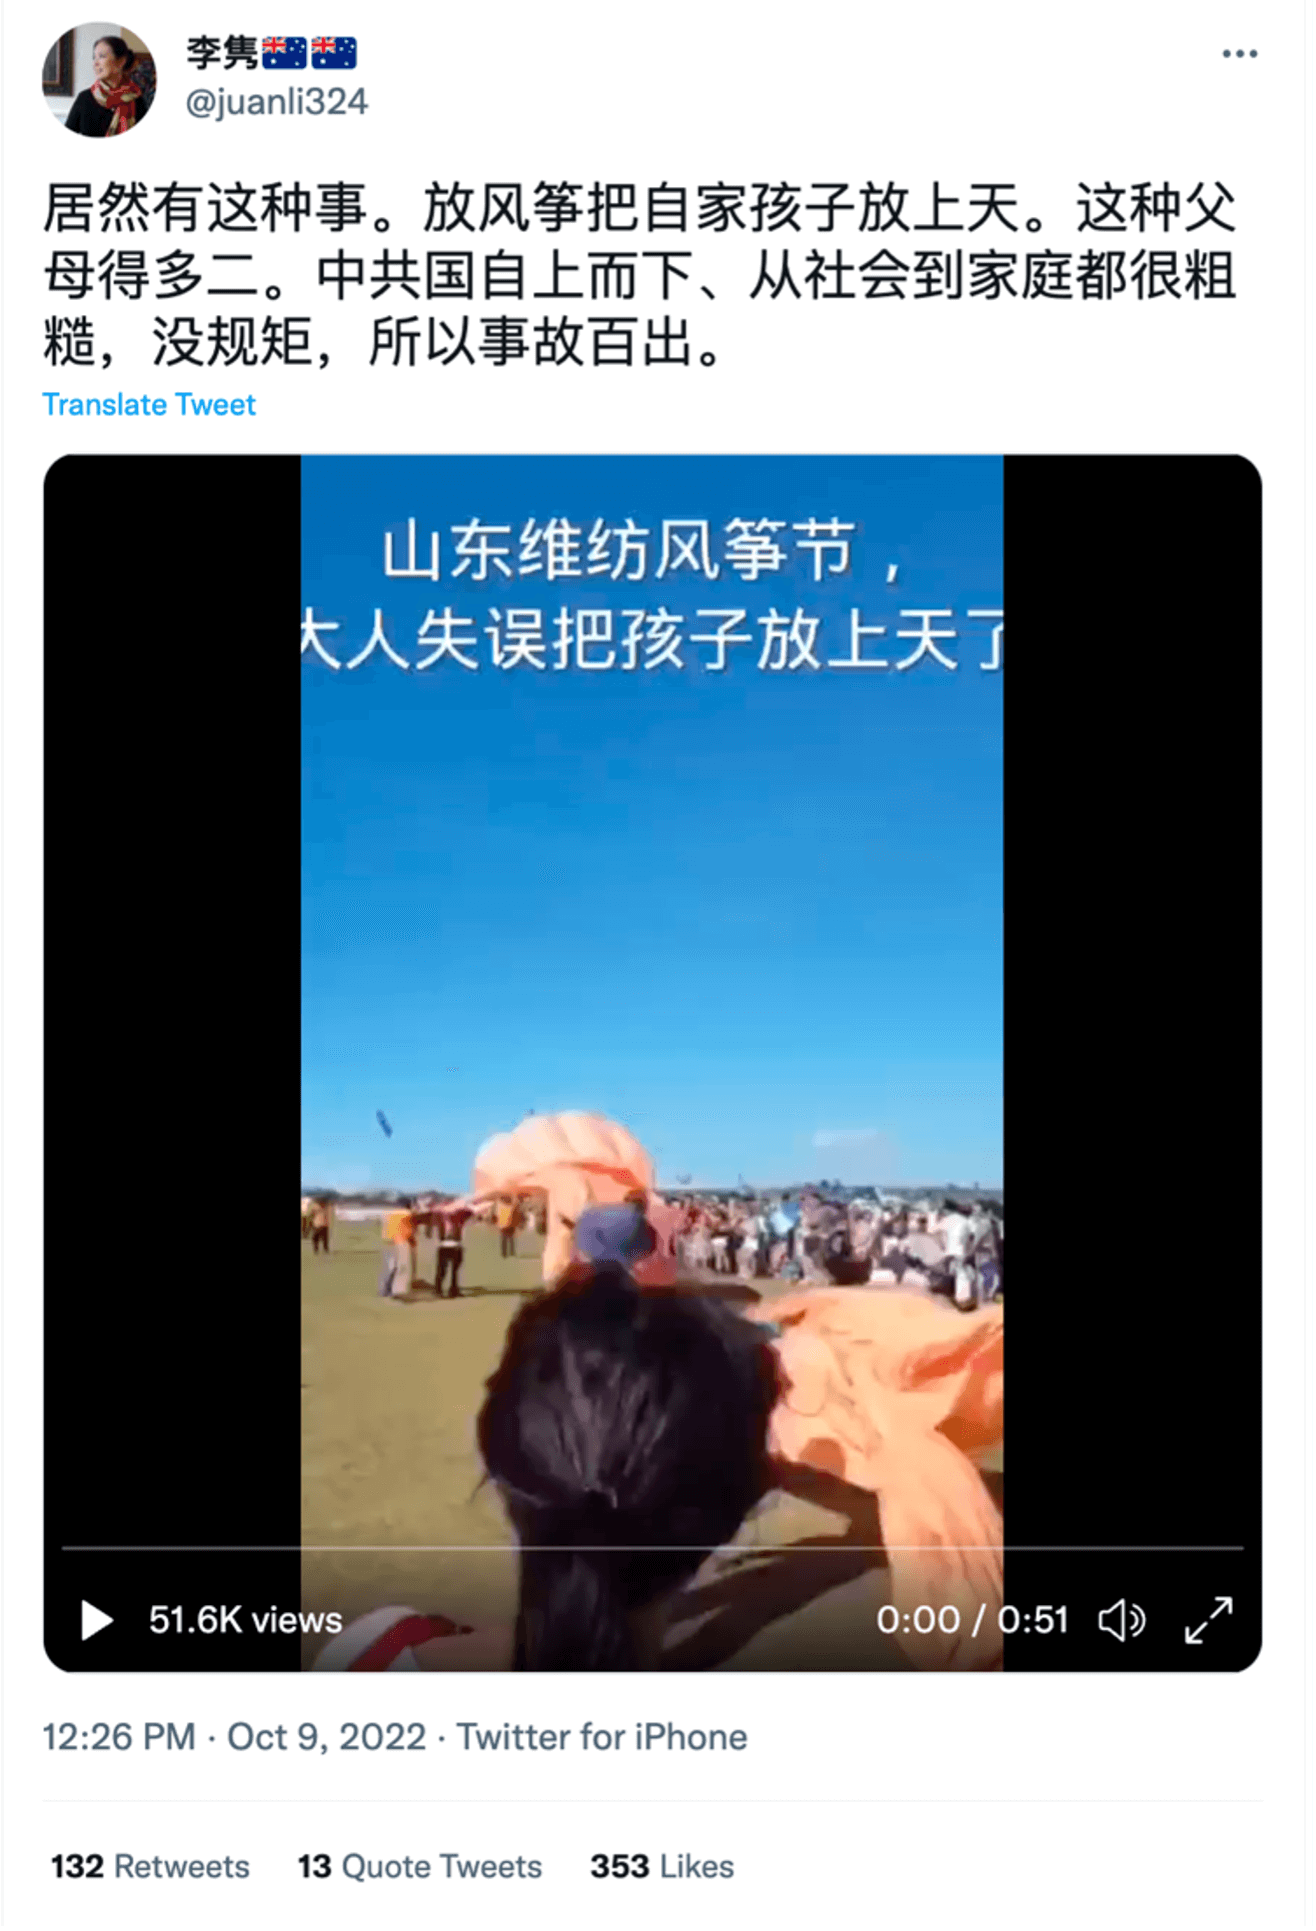 Video of girl lifted high into the air by giant kite was taken in Taiwan in  2020, not at Shandong Weifang Kite Festival - HKBU Fact Check